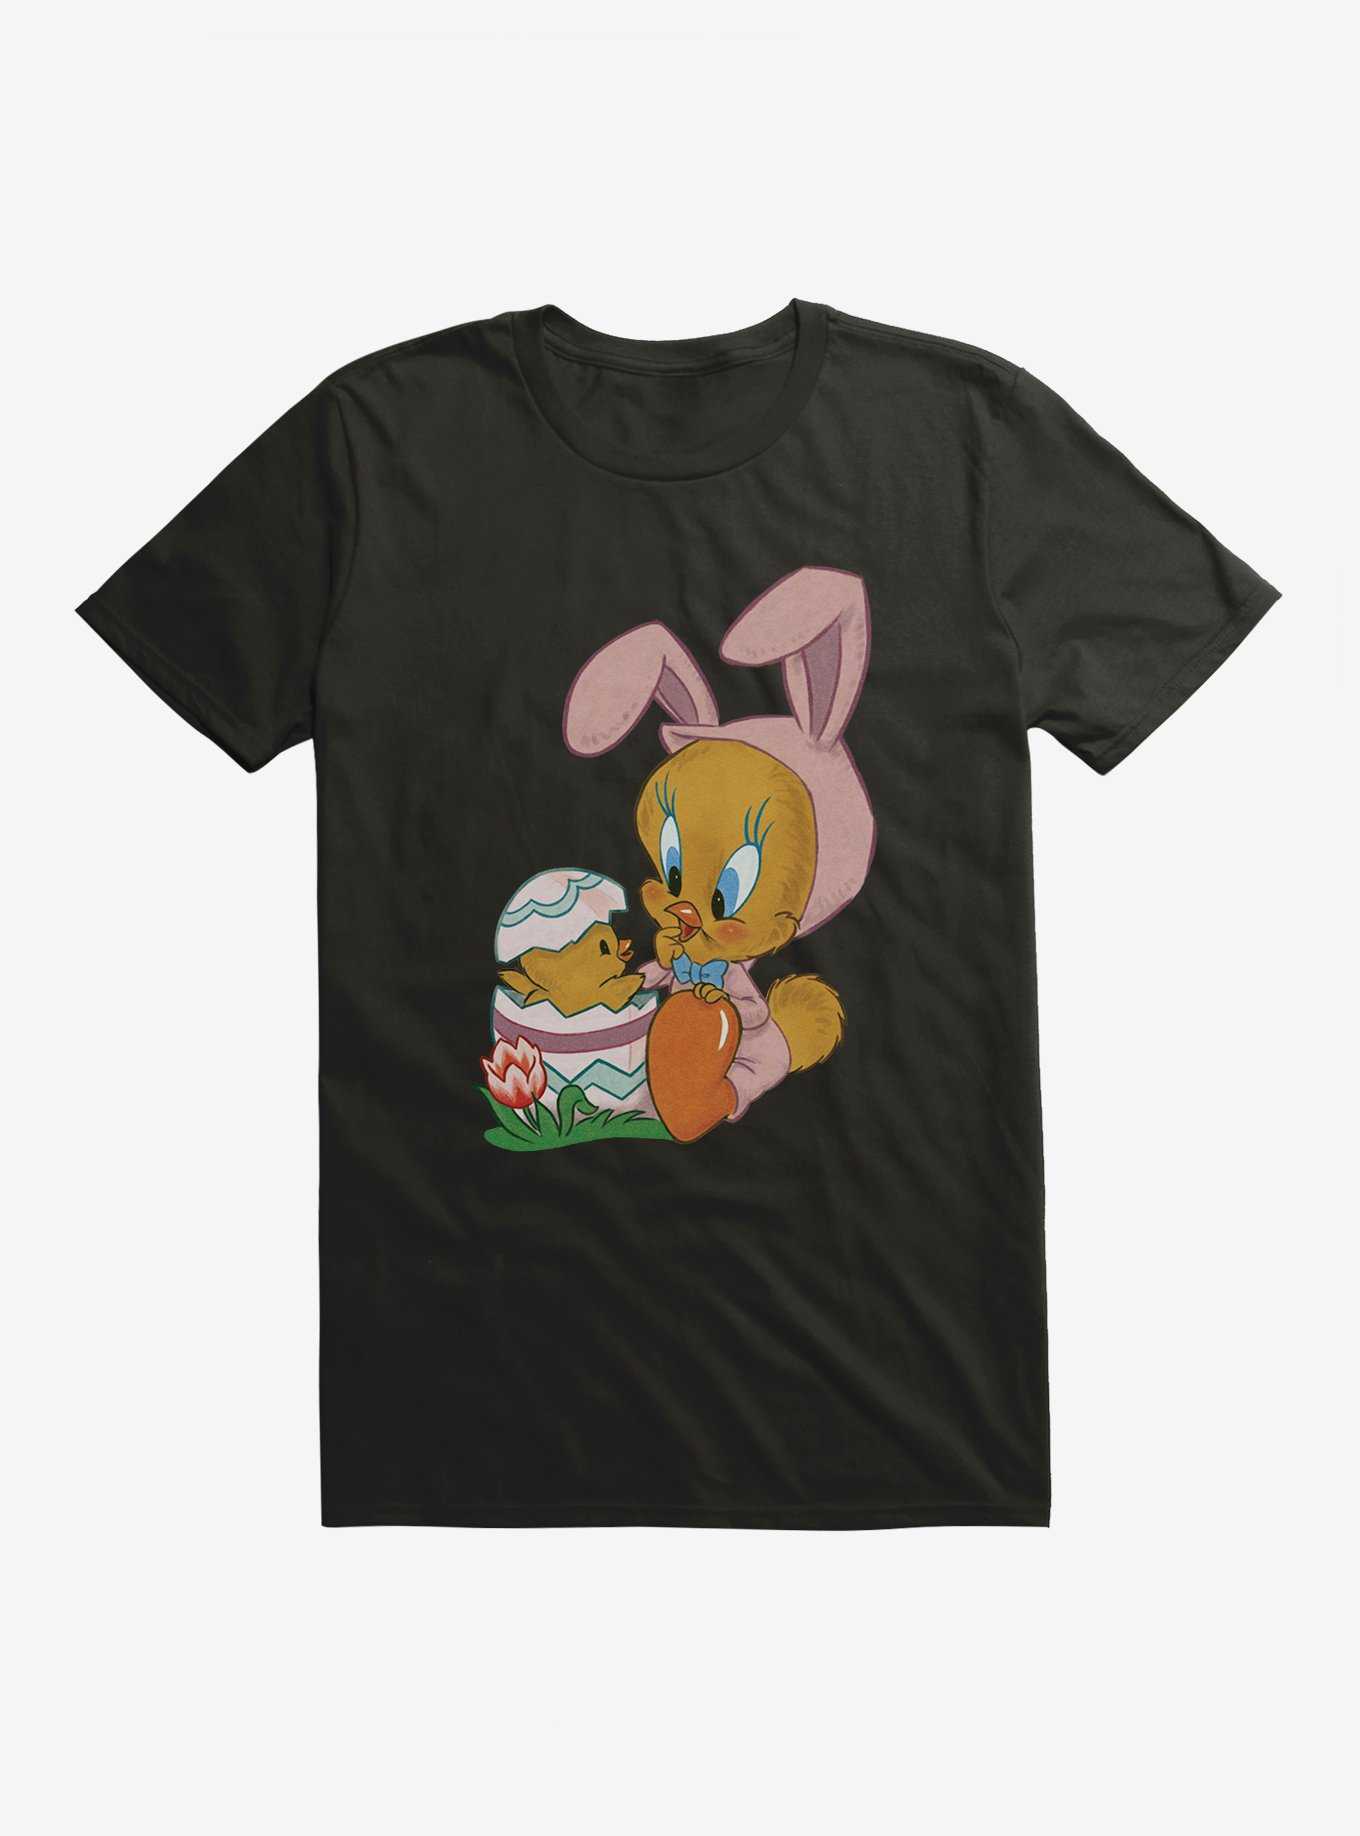 Looney Tunes Easter Baby Chick Tweety T-Shirt, , hi-res